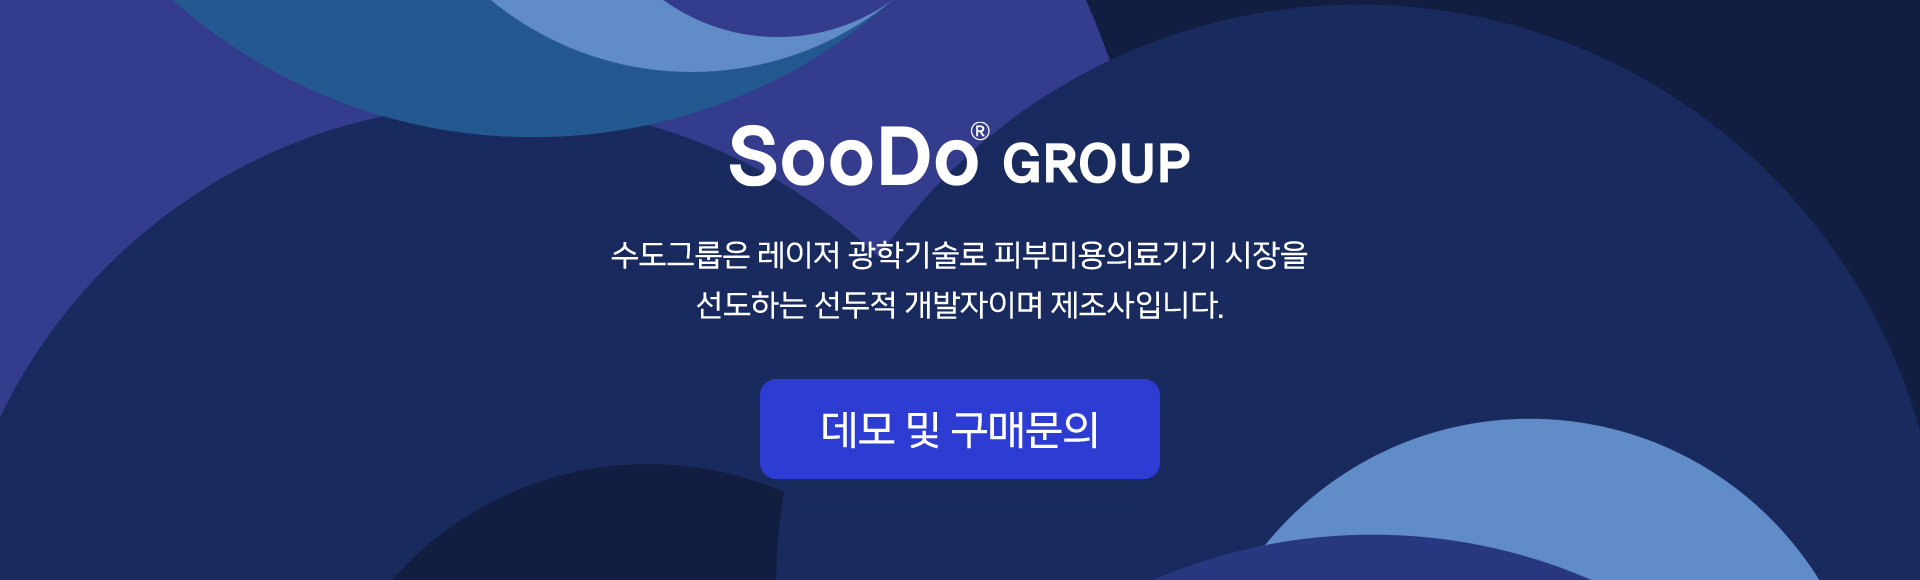 Soodo Group - Inquiry 